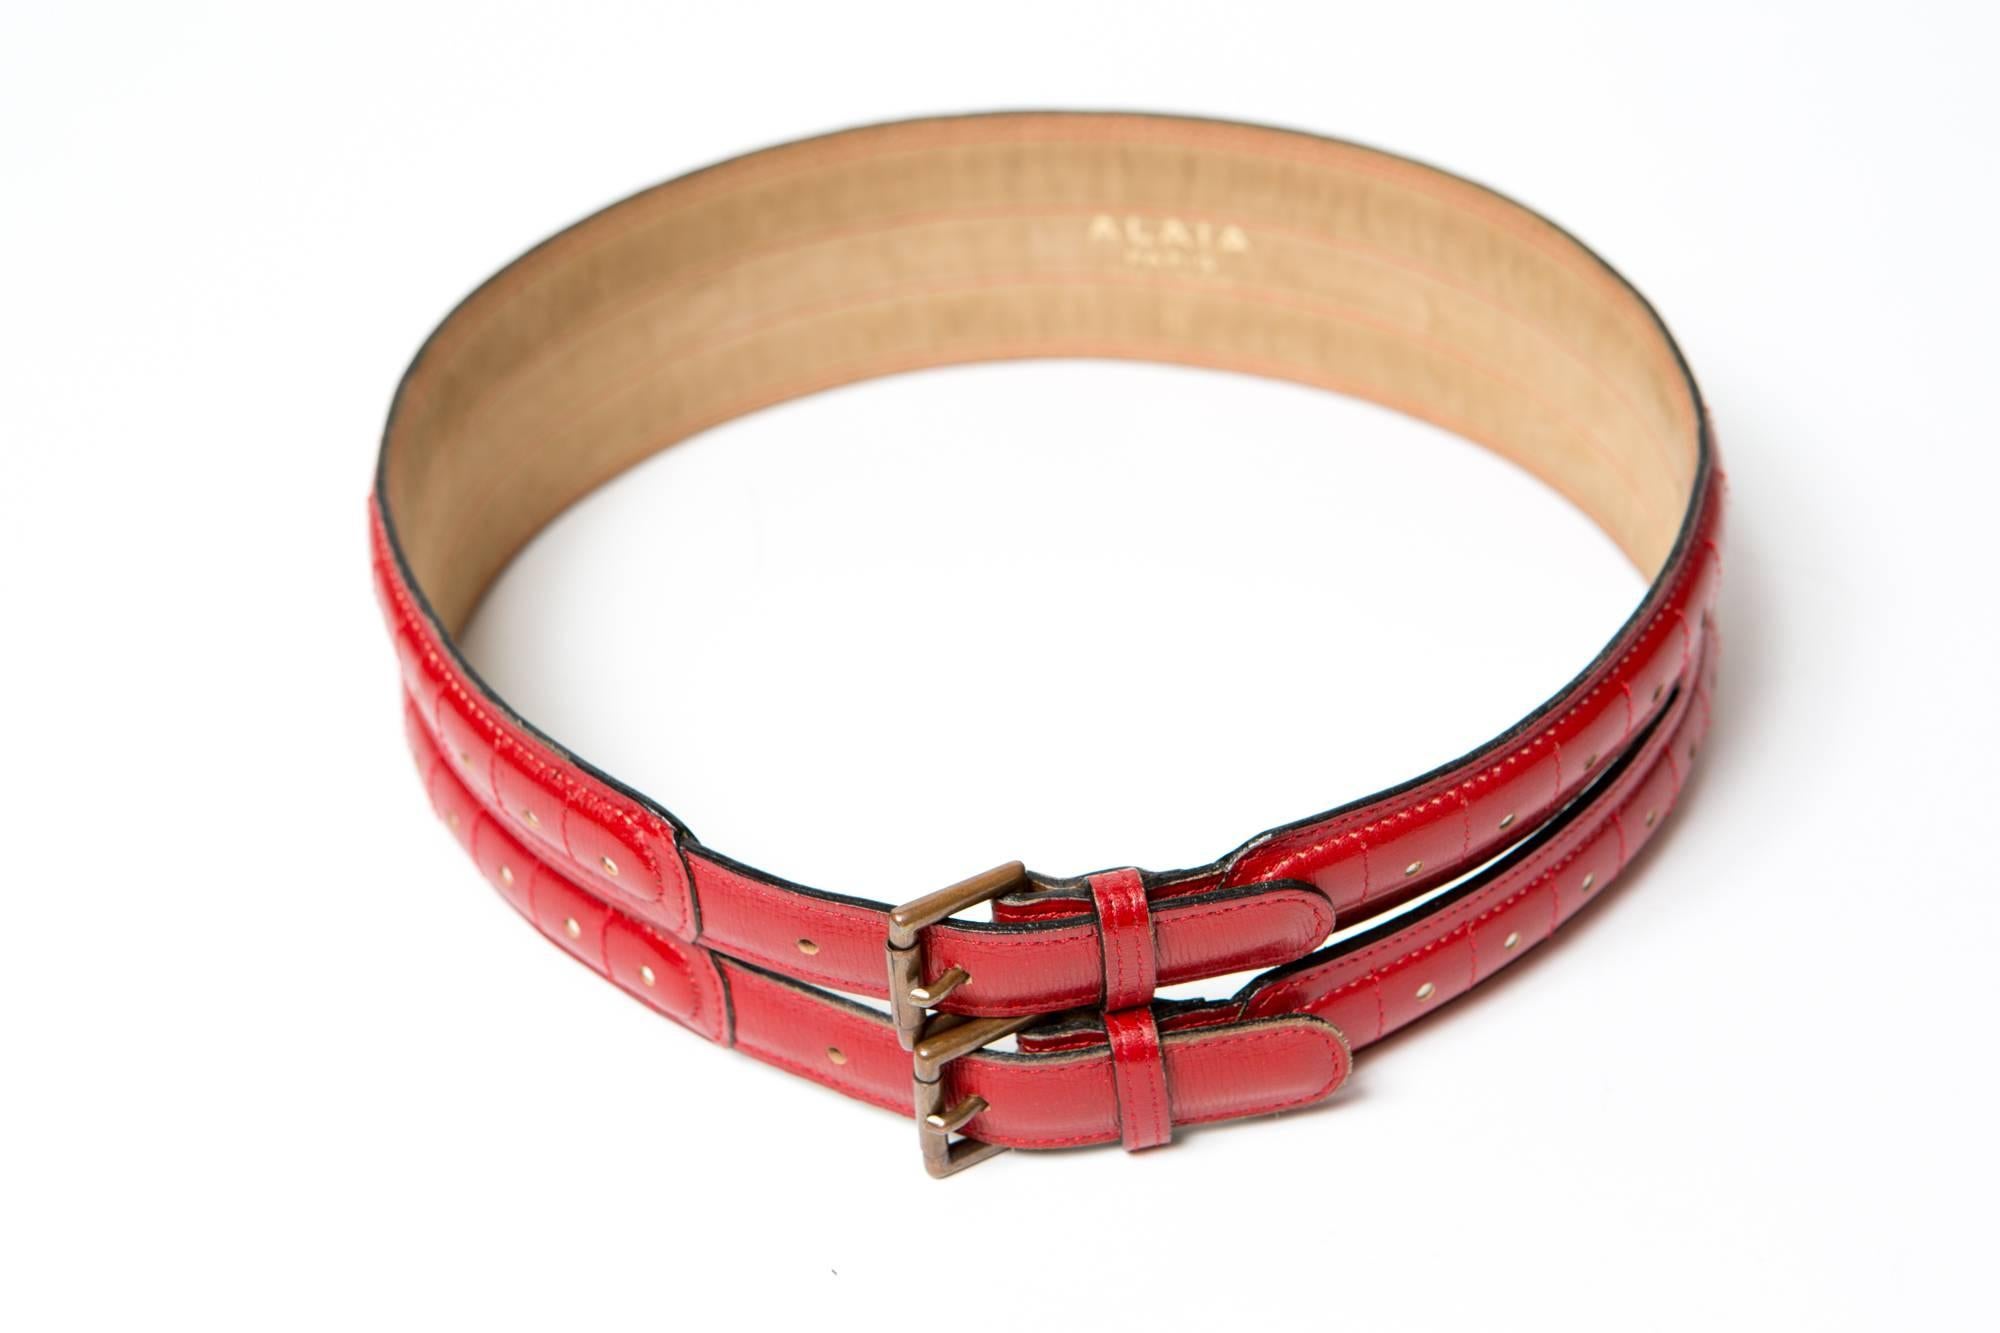 1990s ALAIA  large red leather corset  belt featuring a hole detail, two buckles. 
Size label: 70
Maxi lenght: 6cm X 77cm